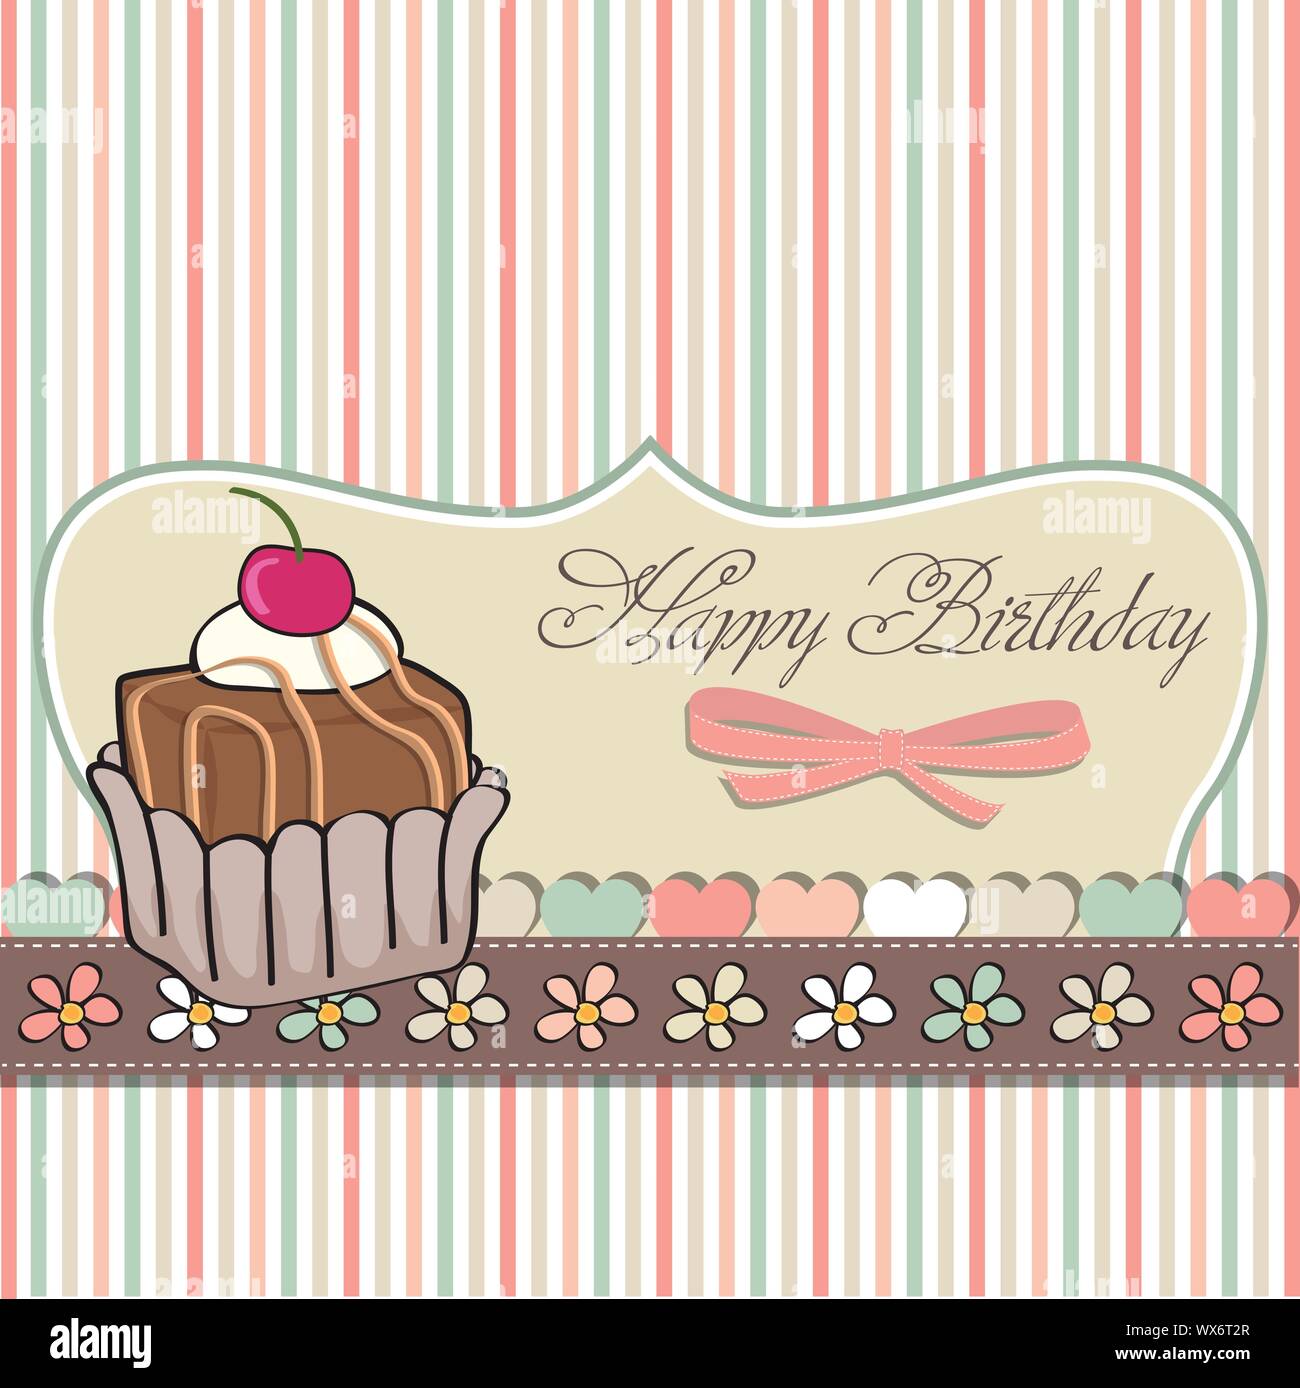 birthday card with cupcake Stock Vector